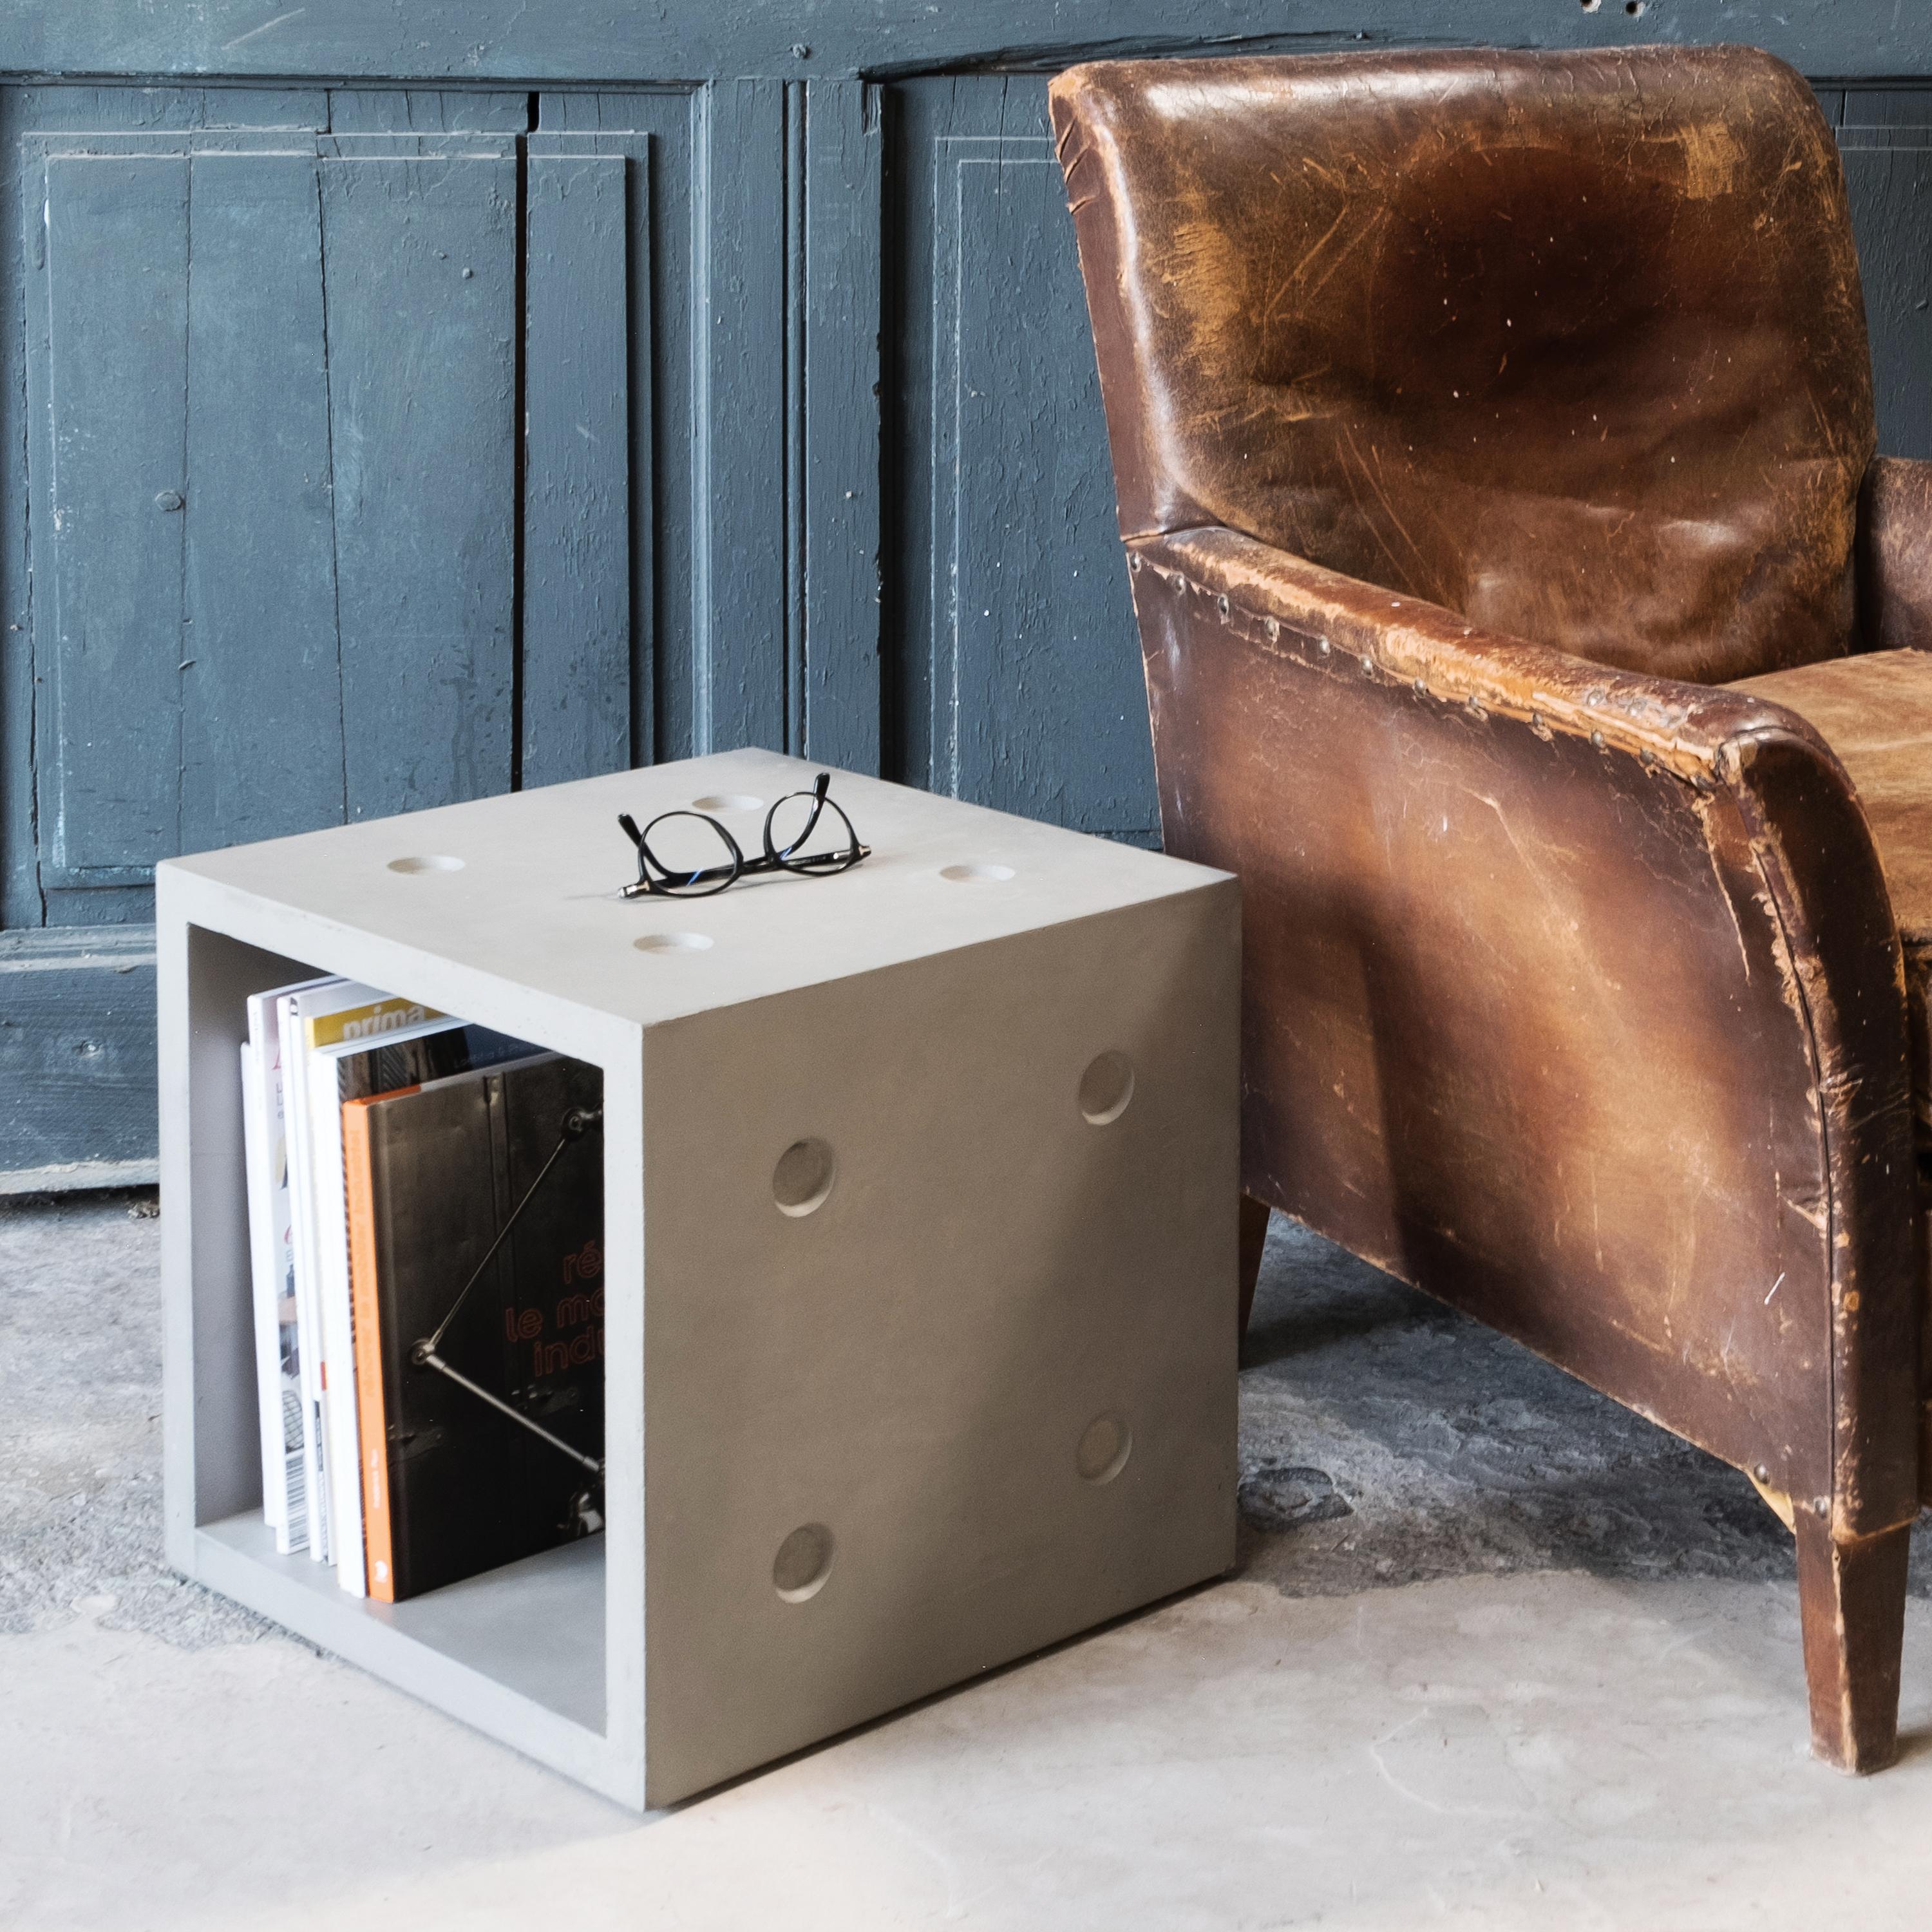 The perfect concrete storage module to organize your space by creating a side table, a coffee table or a side table.
Combine several modules, thanks to our rubber connectors, and you will be able to create more ambitious bespoke furniture: shelves,